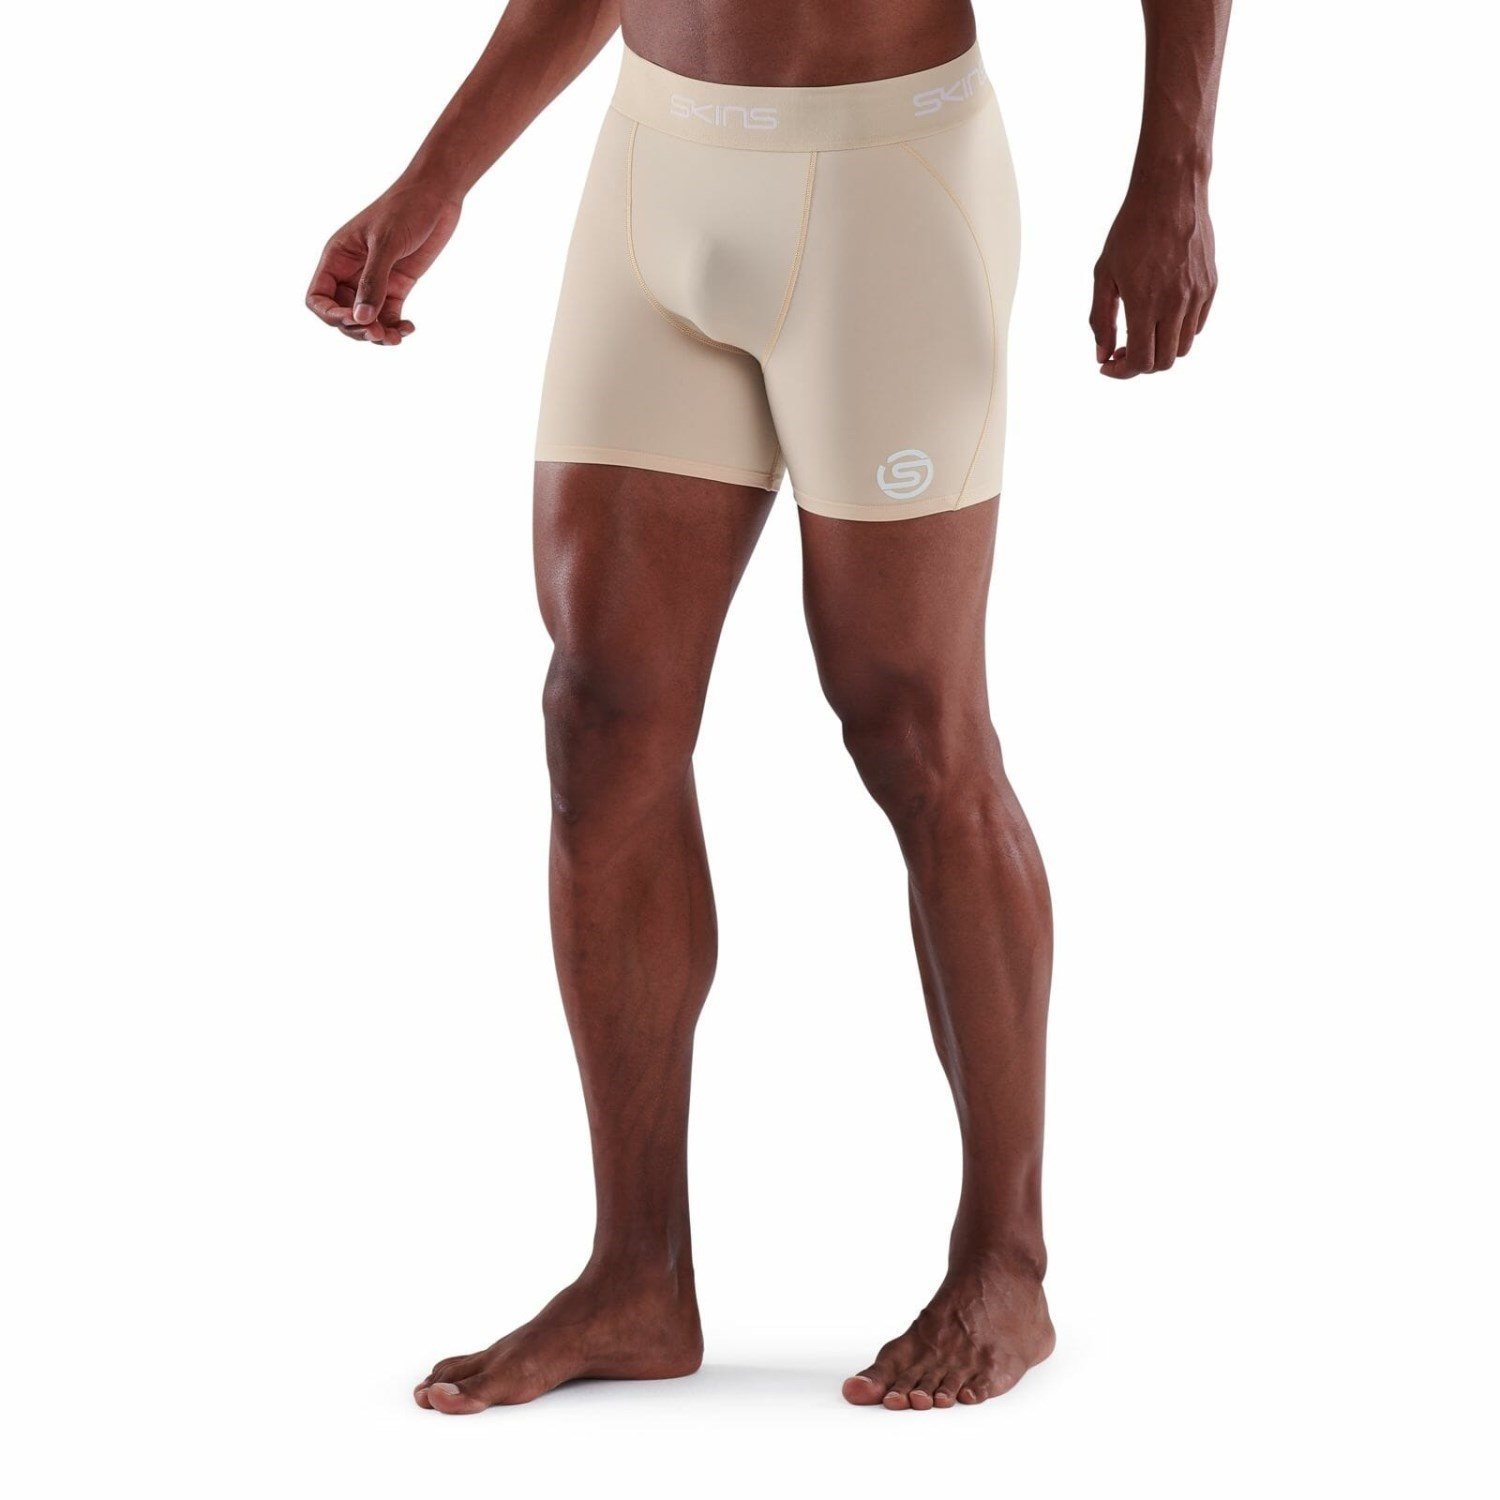  Skins Men's A400 Compression 1/2 Tights/Shorts, White